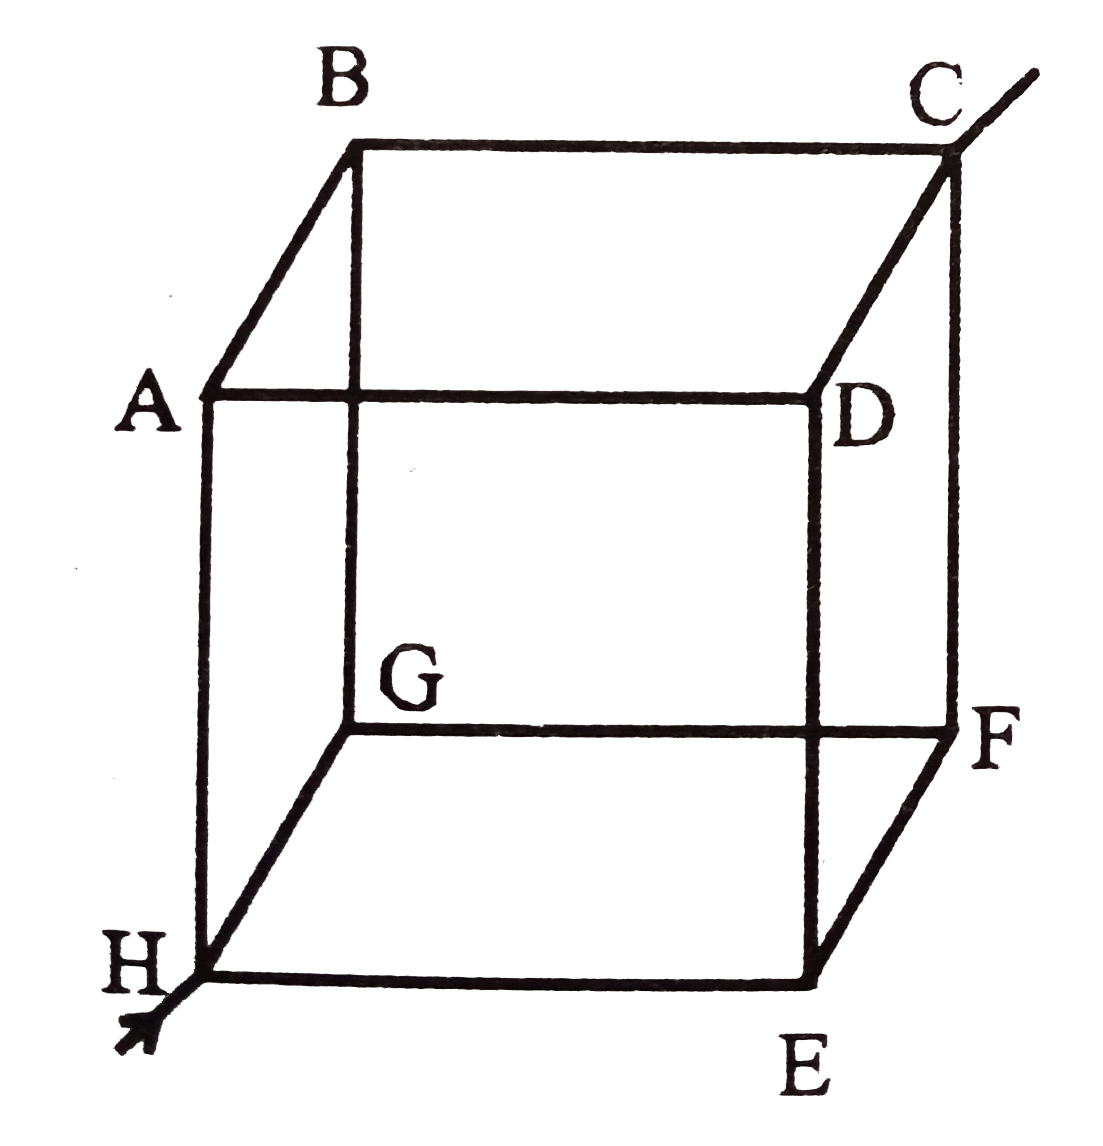 In the box shown current i enters at H and leaves at C. If i(AB) = i/6, i(DC) = (2i)/3 , i(HA) = i/2 , i(GF)= i/6 , i(HE) = i/6 , choose the branch in which current is zero